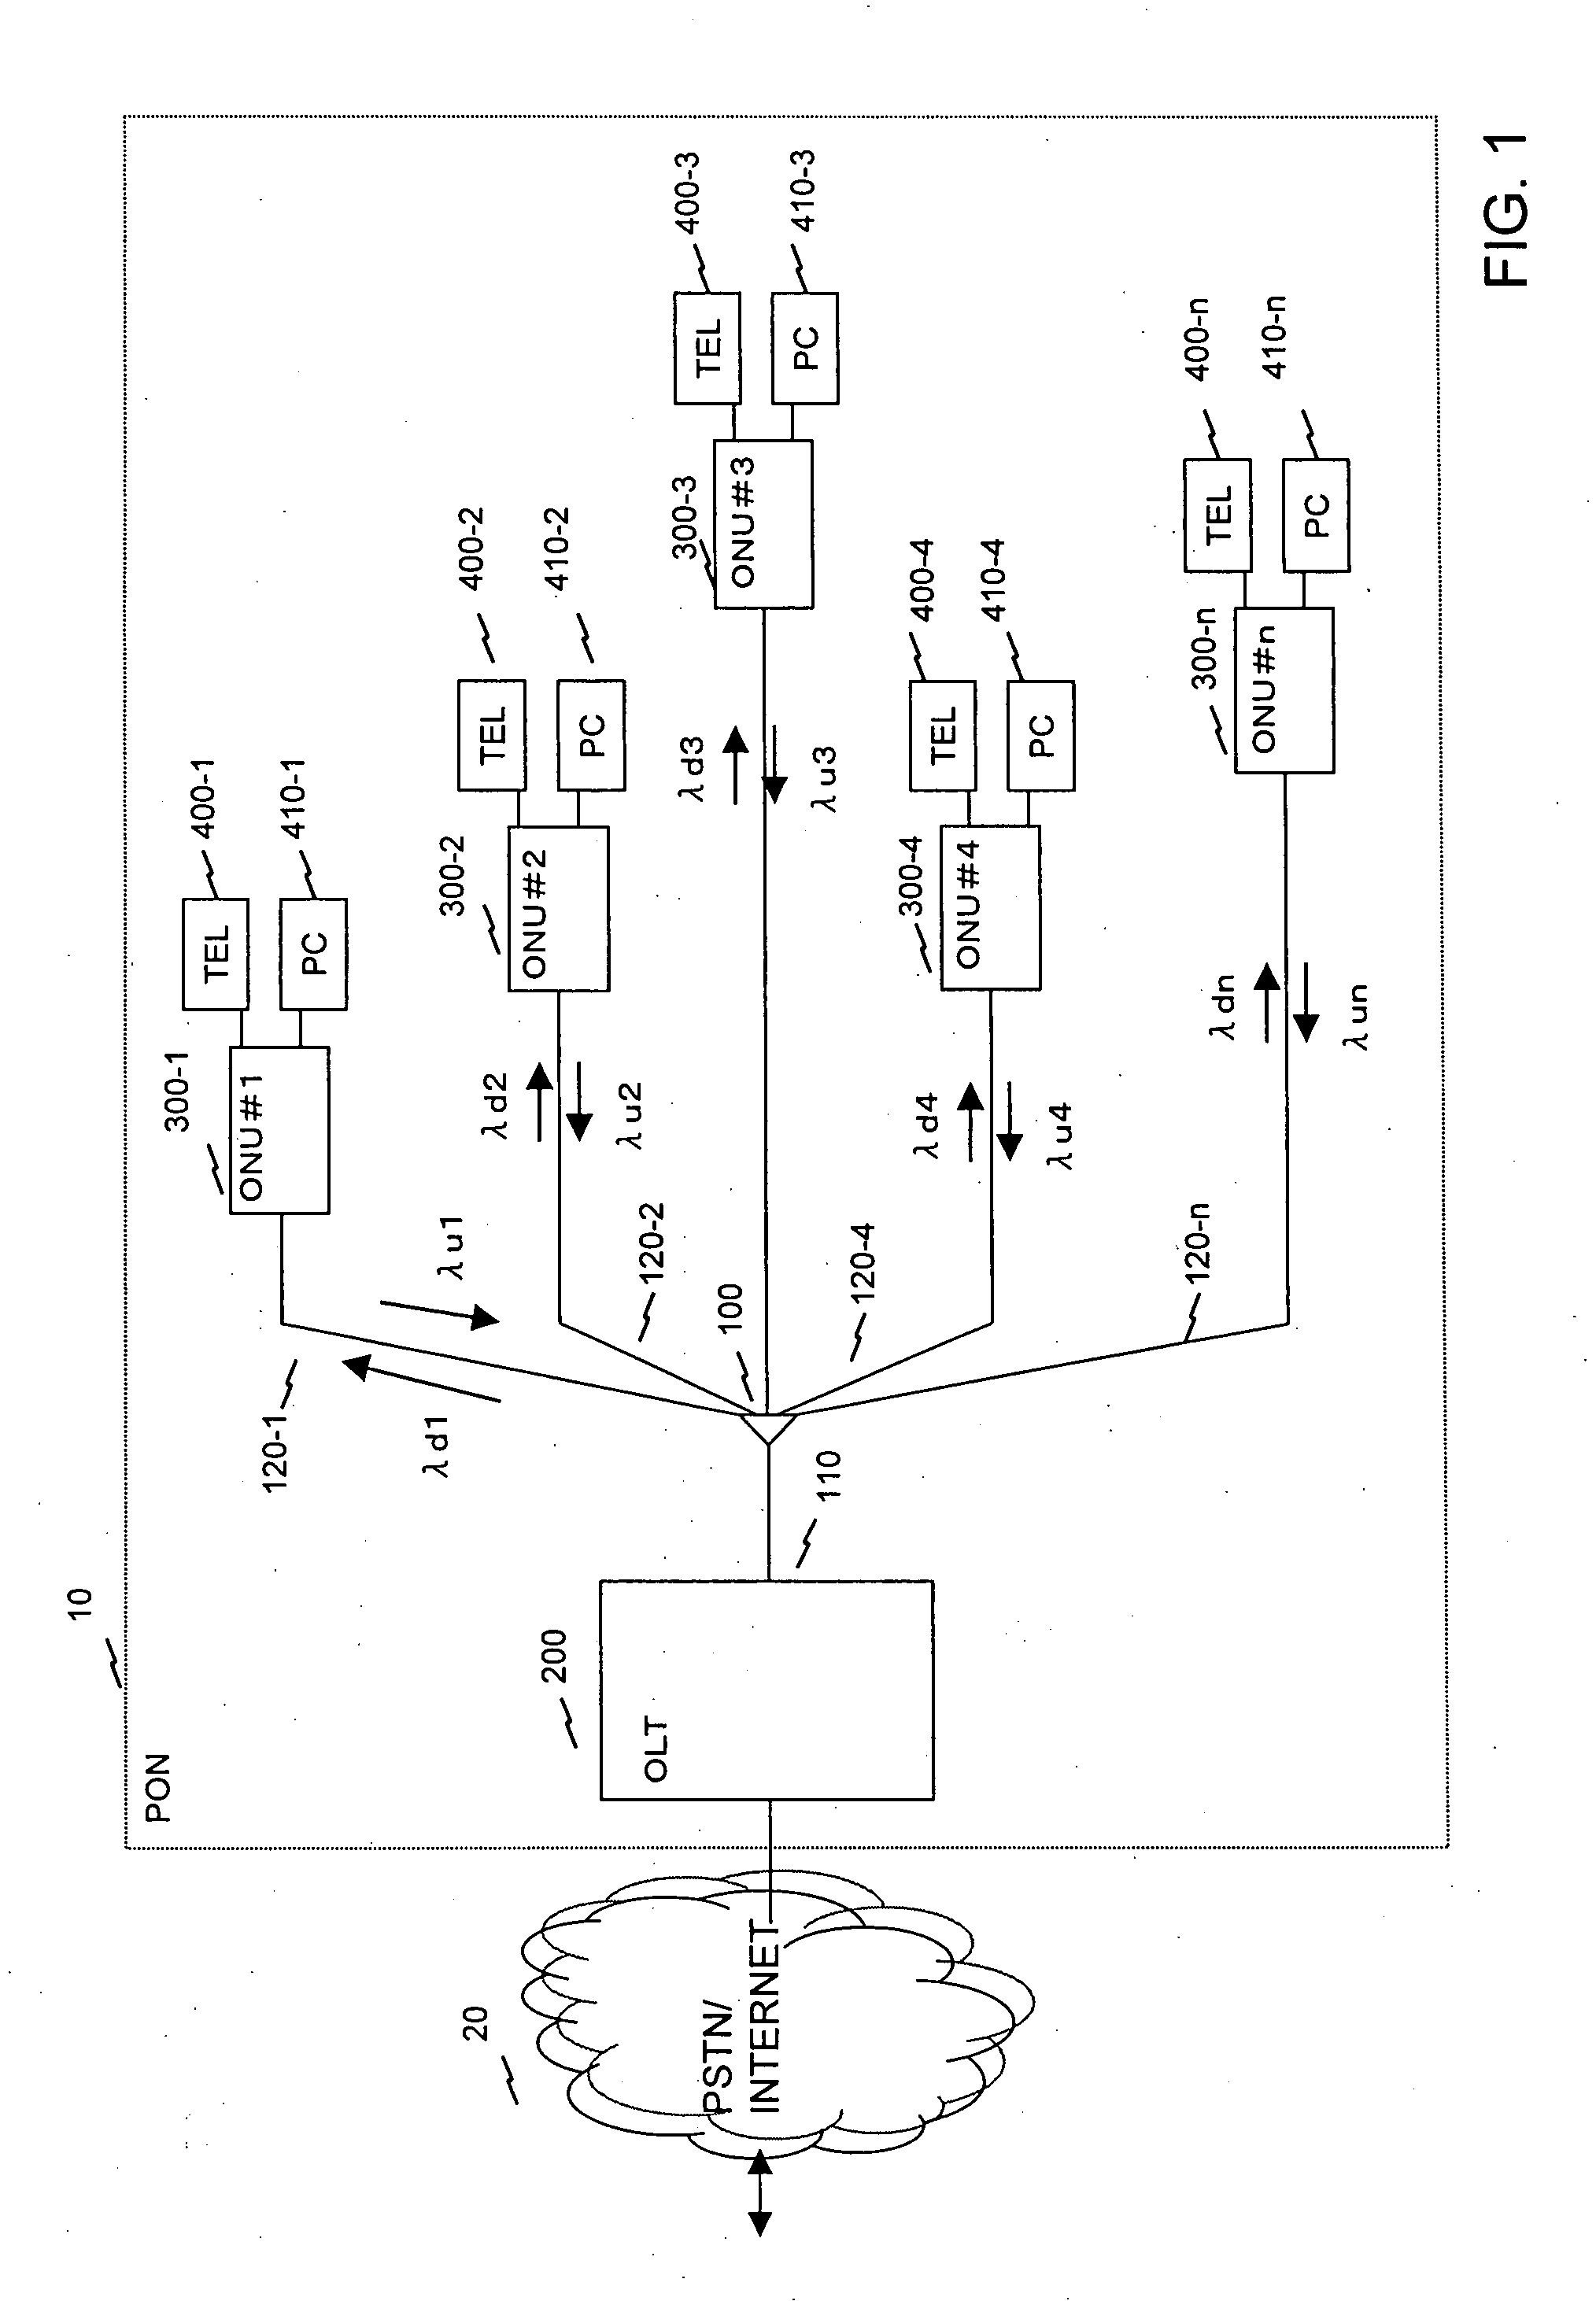 Passive optical network system and wavelength assignment method